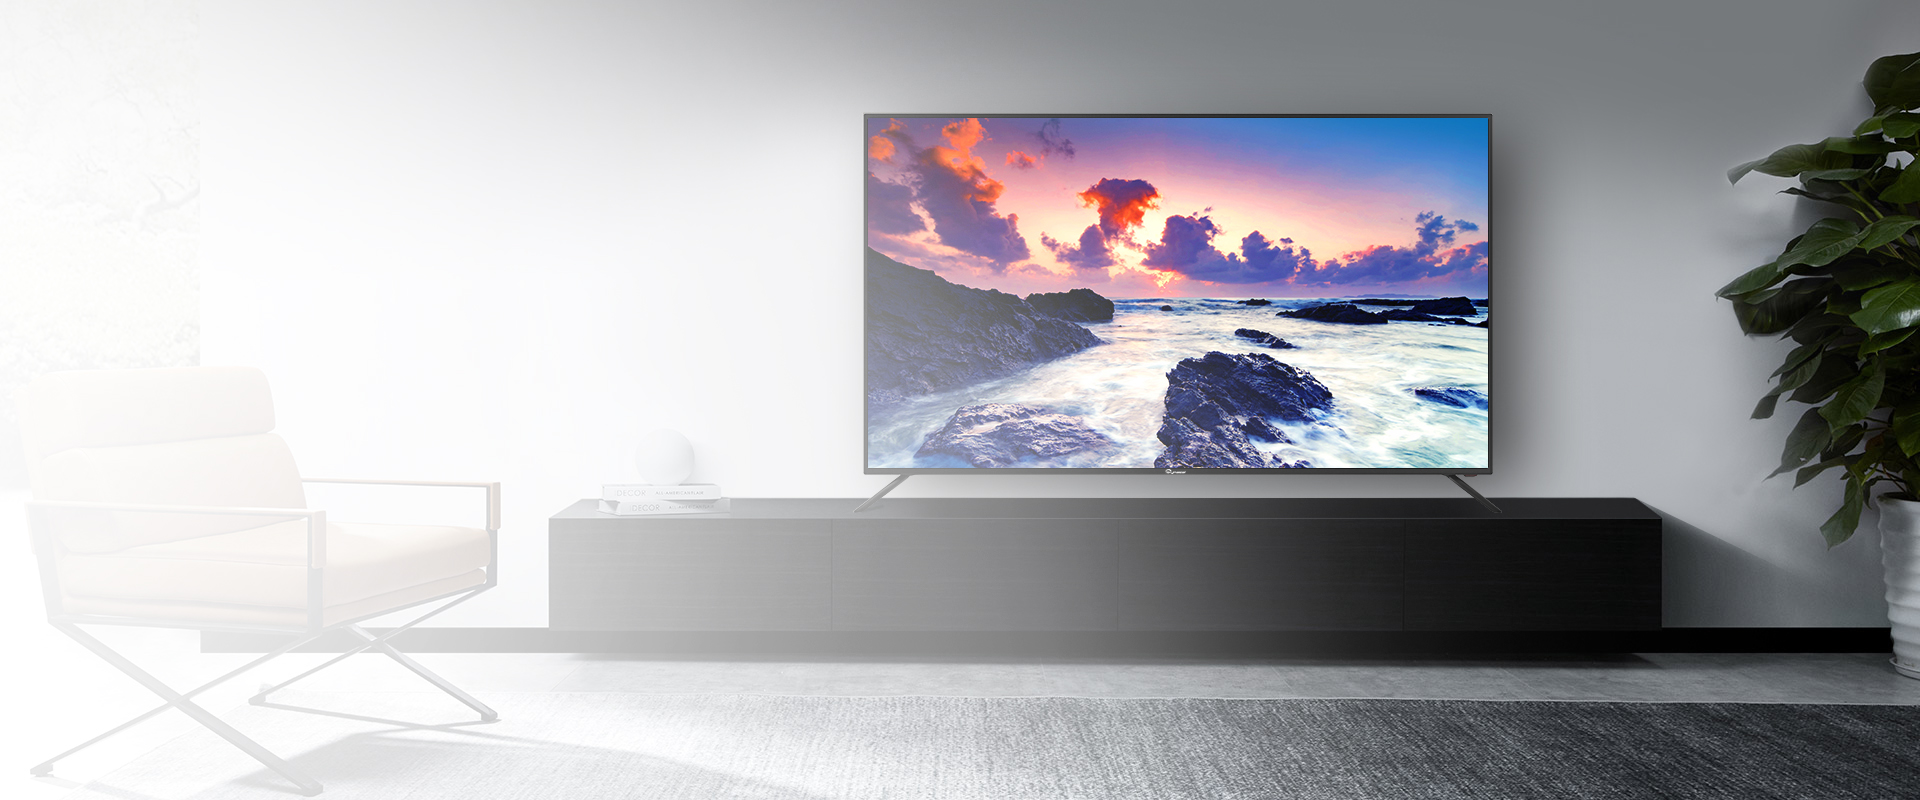 tv-product-banner